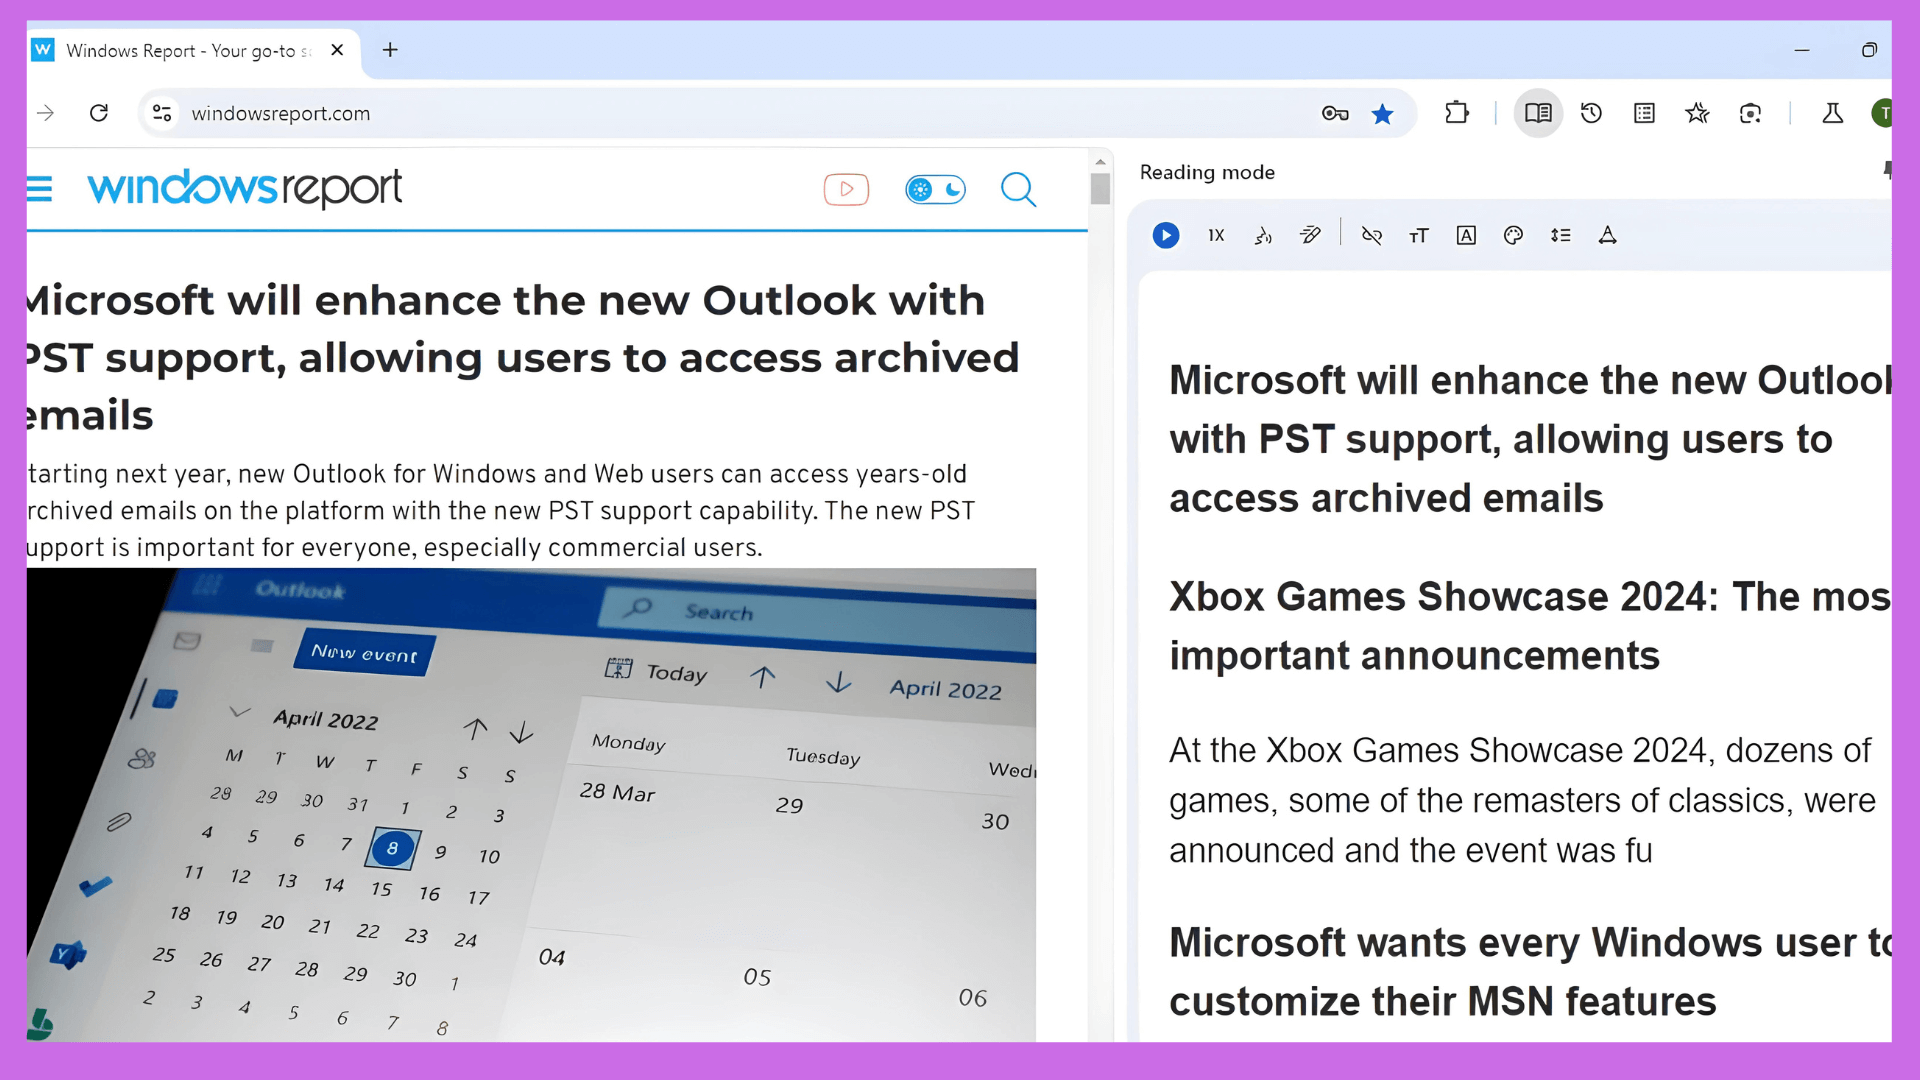 Chrome to save Side Panel width after resize across sessions